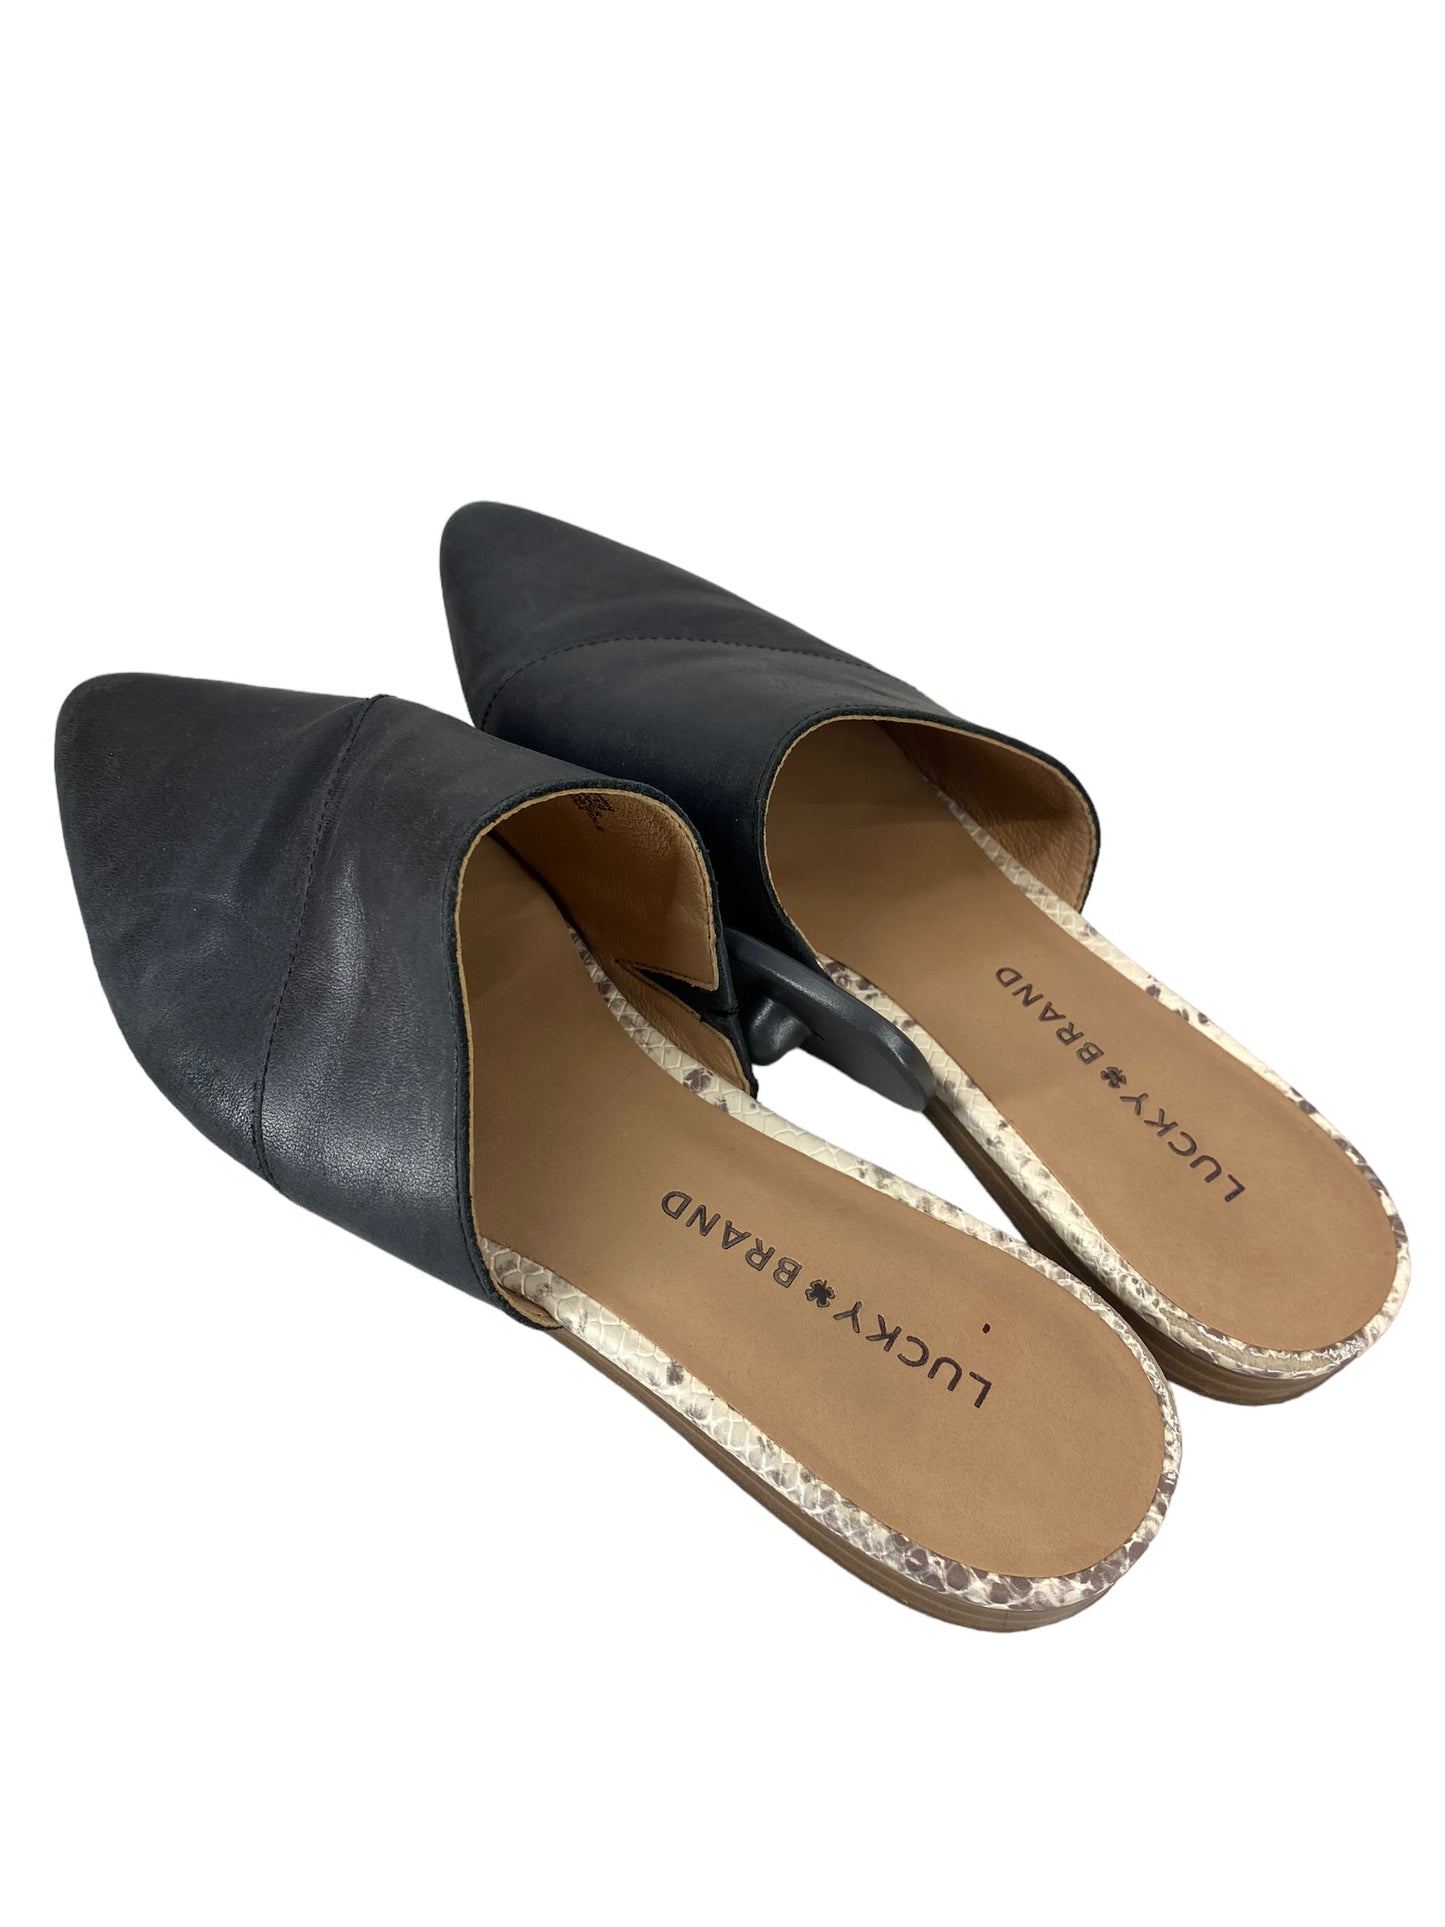 Shoes Flats By Lucky Brand  Size: 8.5